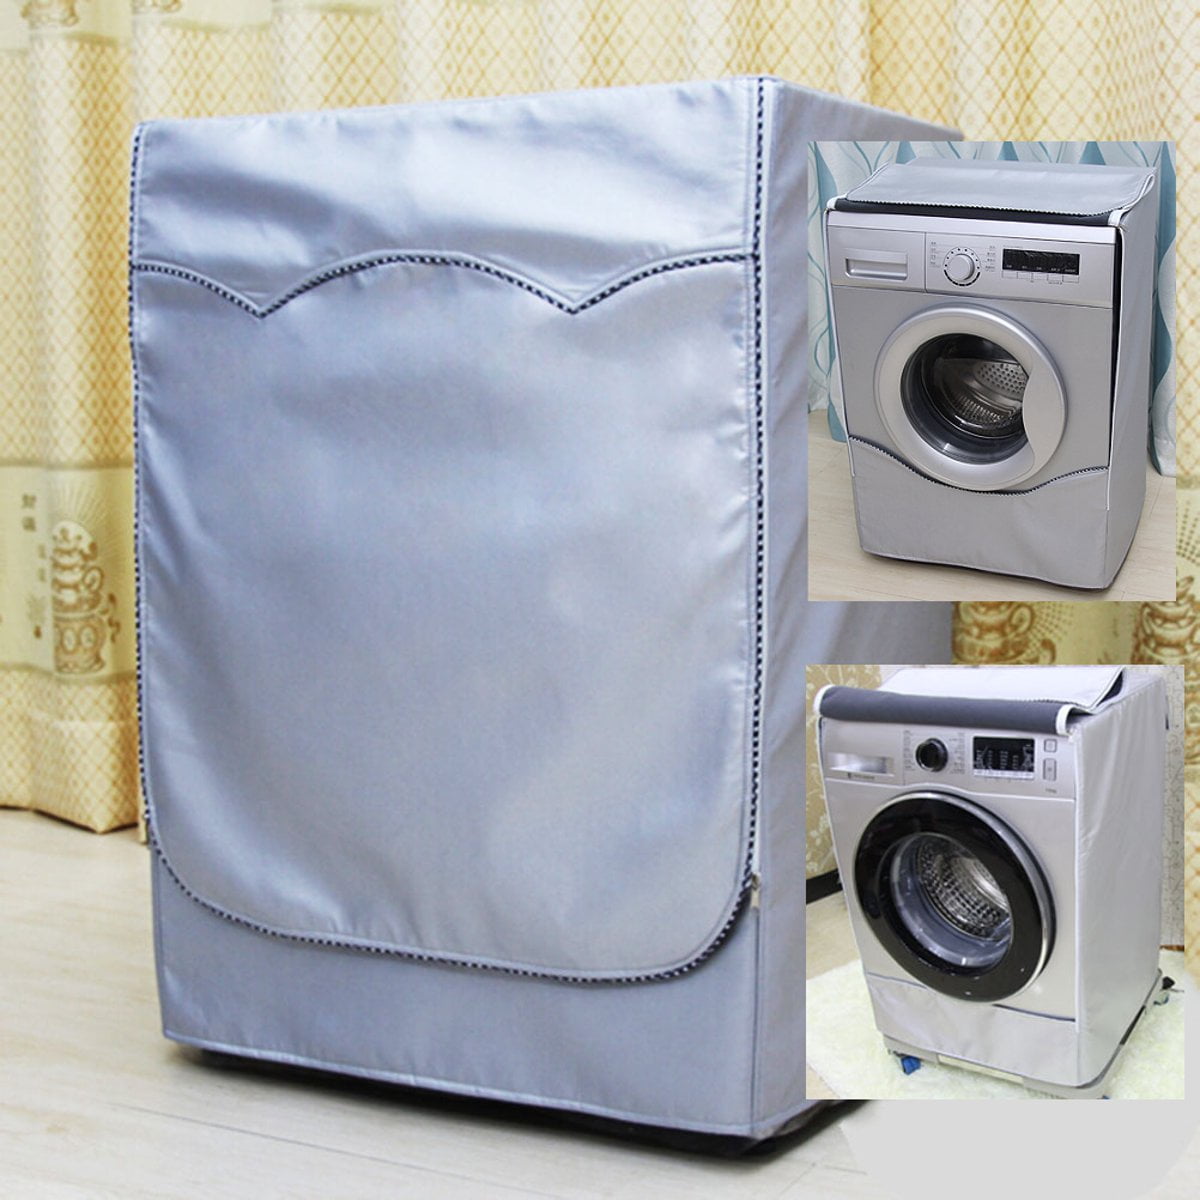 Dogggy 1PCS Washing Machine Cover For Front Load Washer Home Laundry Dryer Dust Proof Waterproof Sunscreen Thicker Fabric Zipper Design for Easy use Case Protective Dust Jacket 